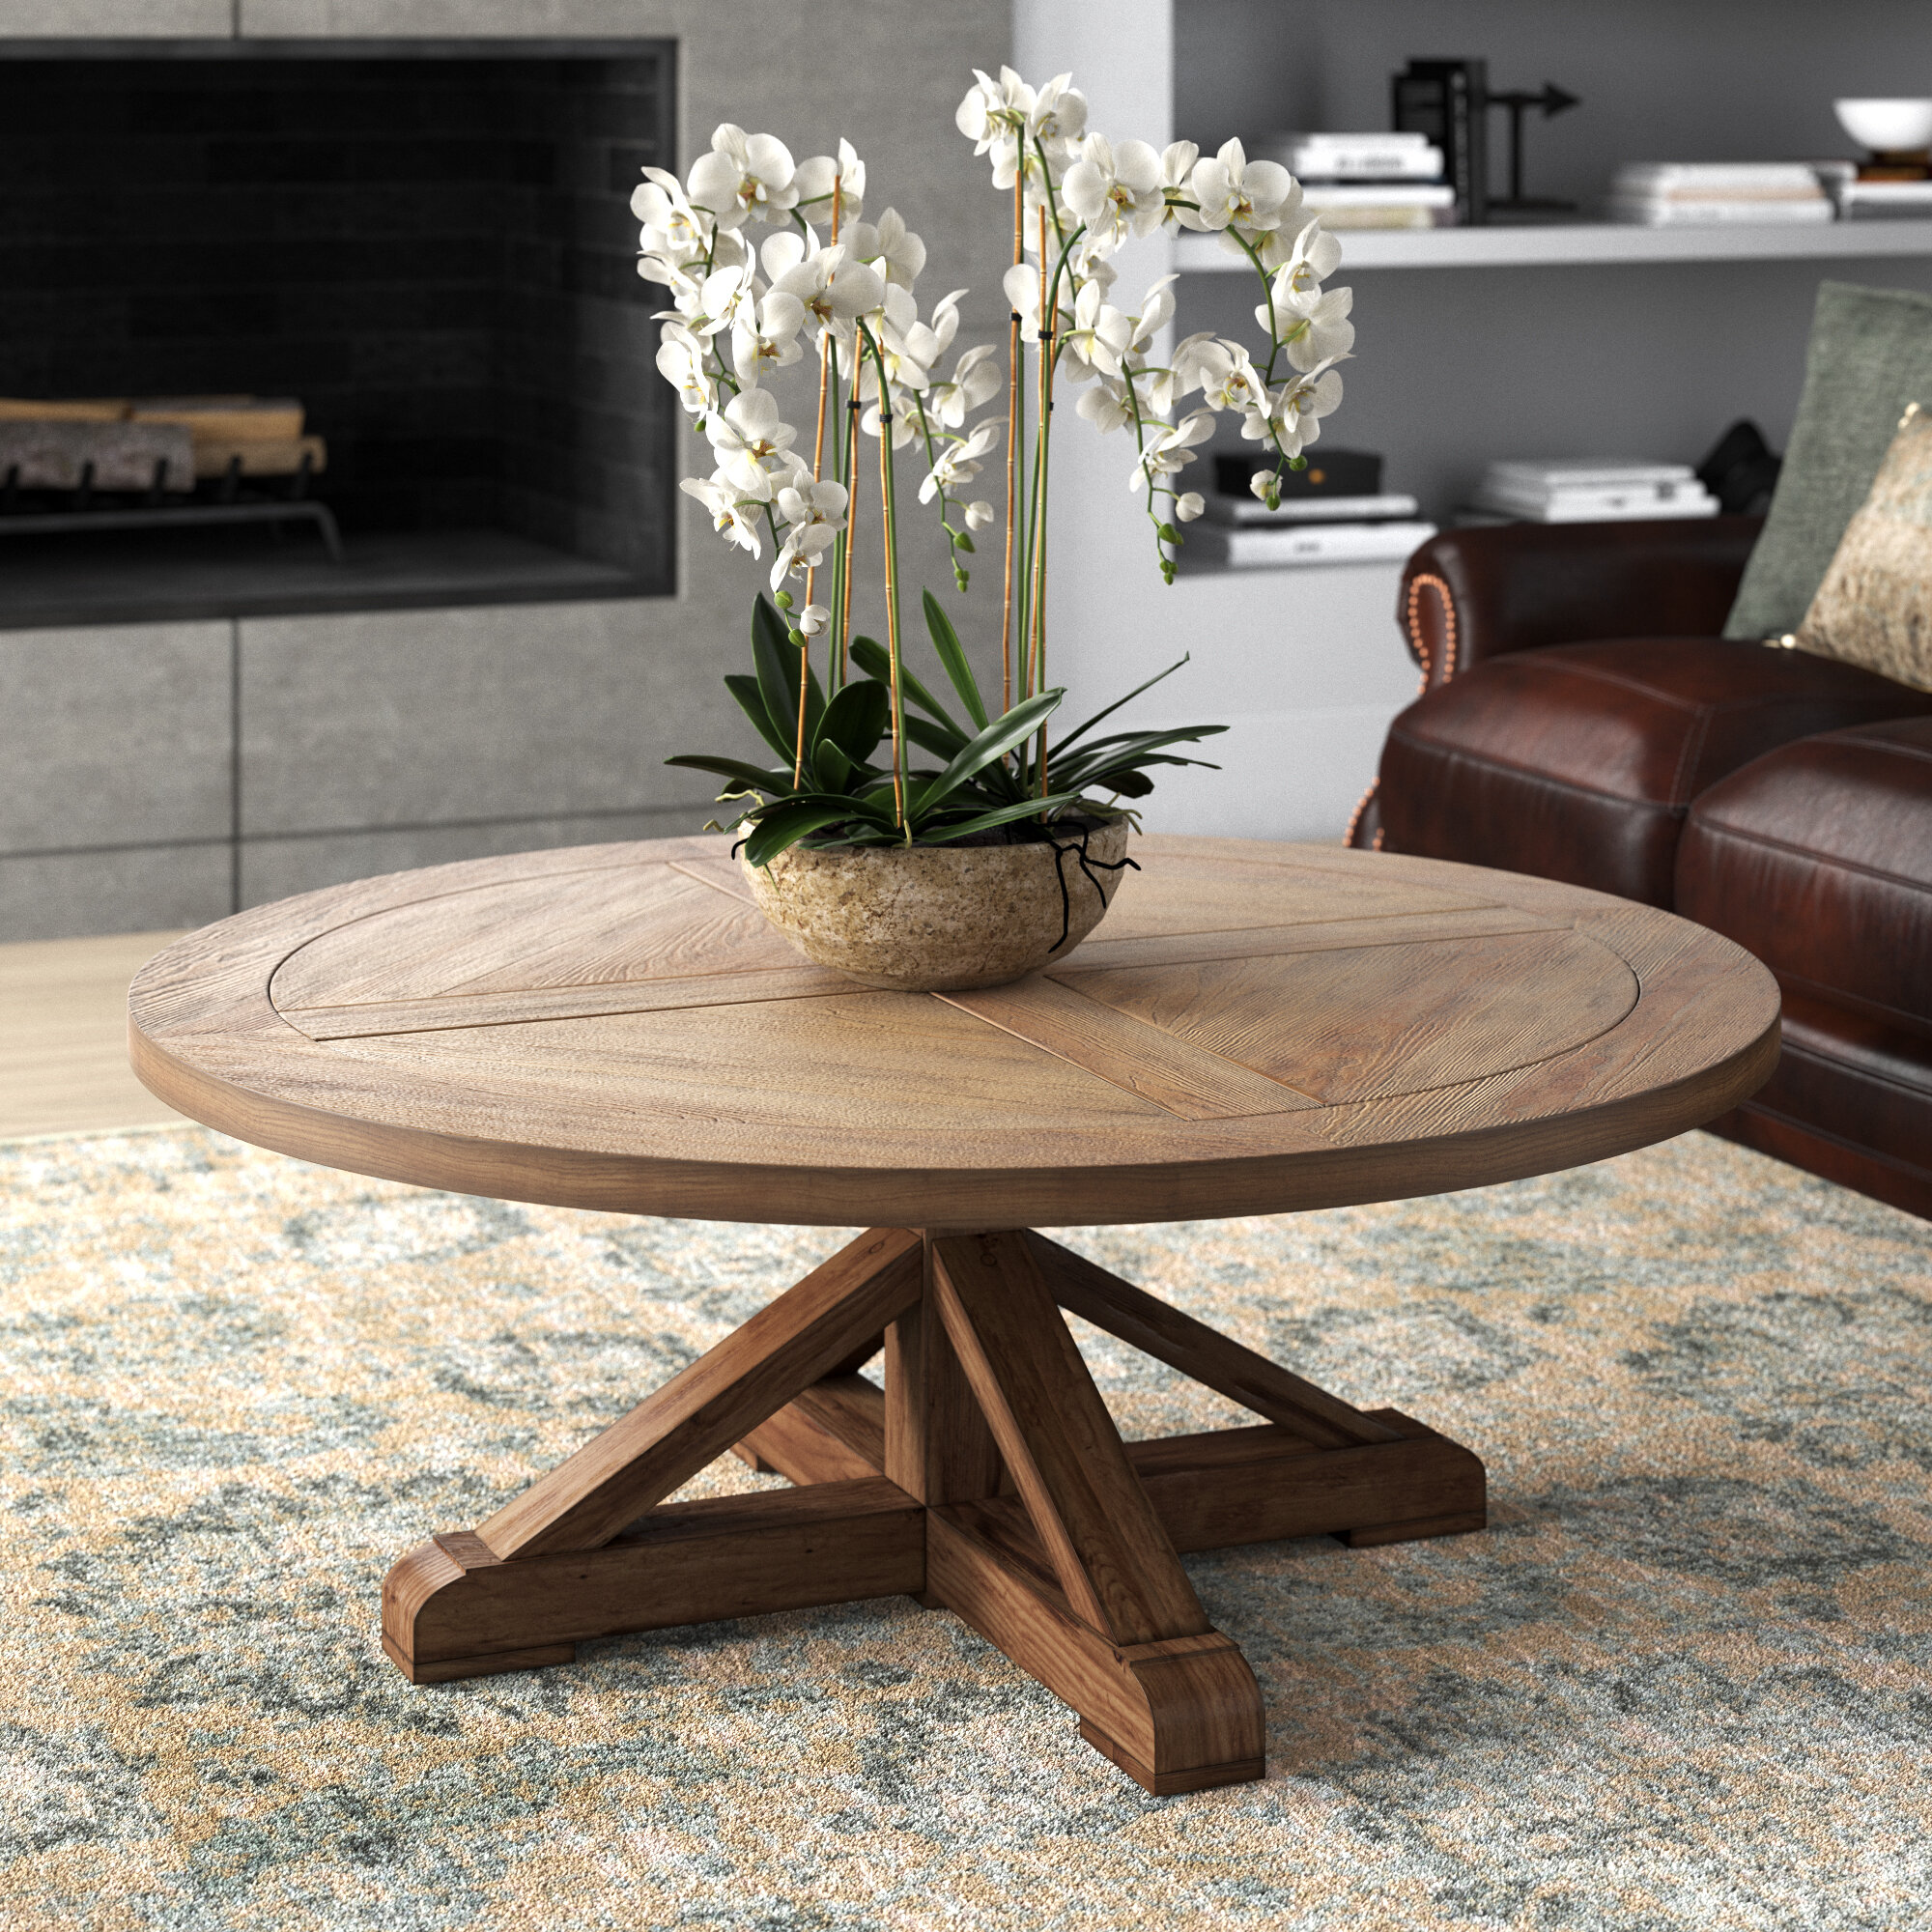 Pedestal Coffee Table Round : Plateau Pedestal Coffee Table Reviews Allmodern - Rated 4 out of 5 stars.